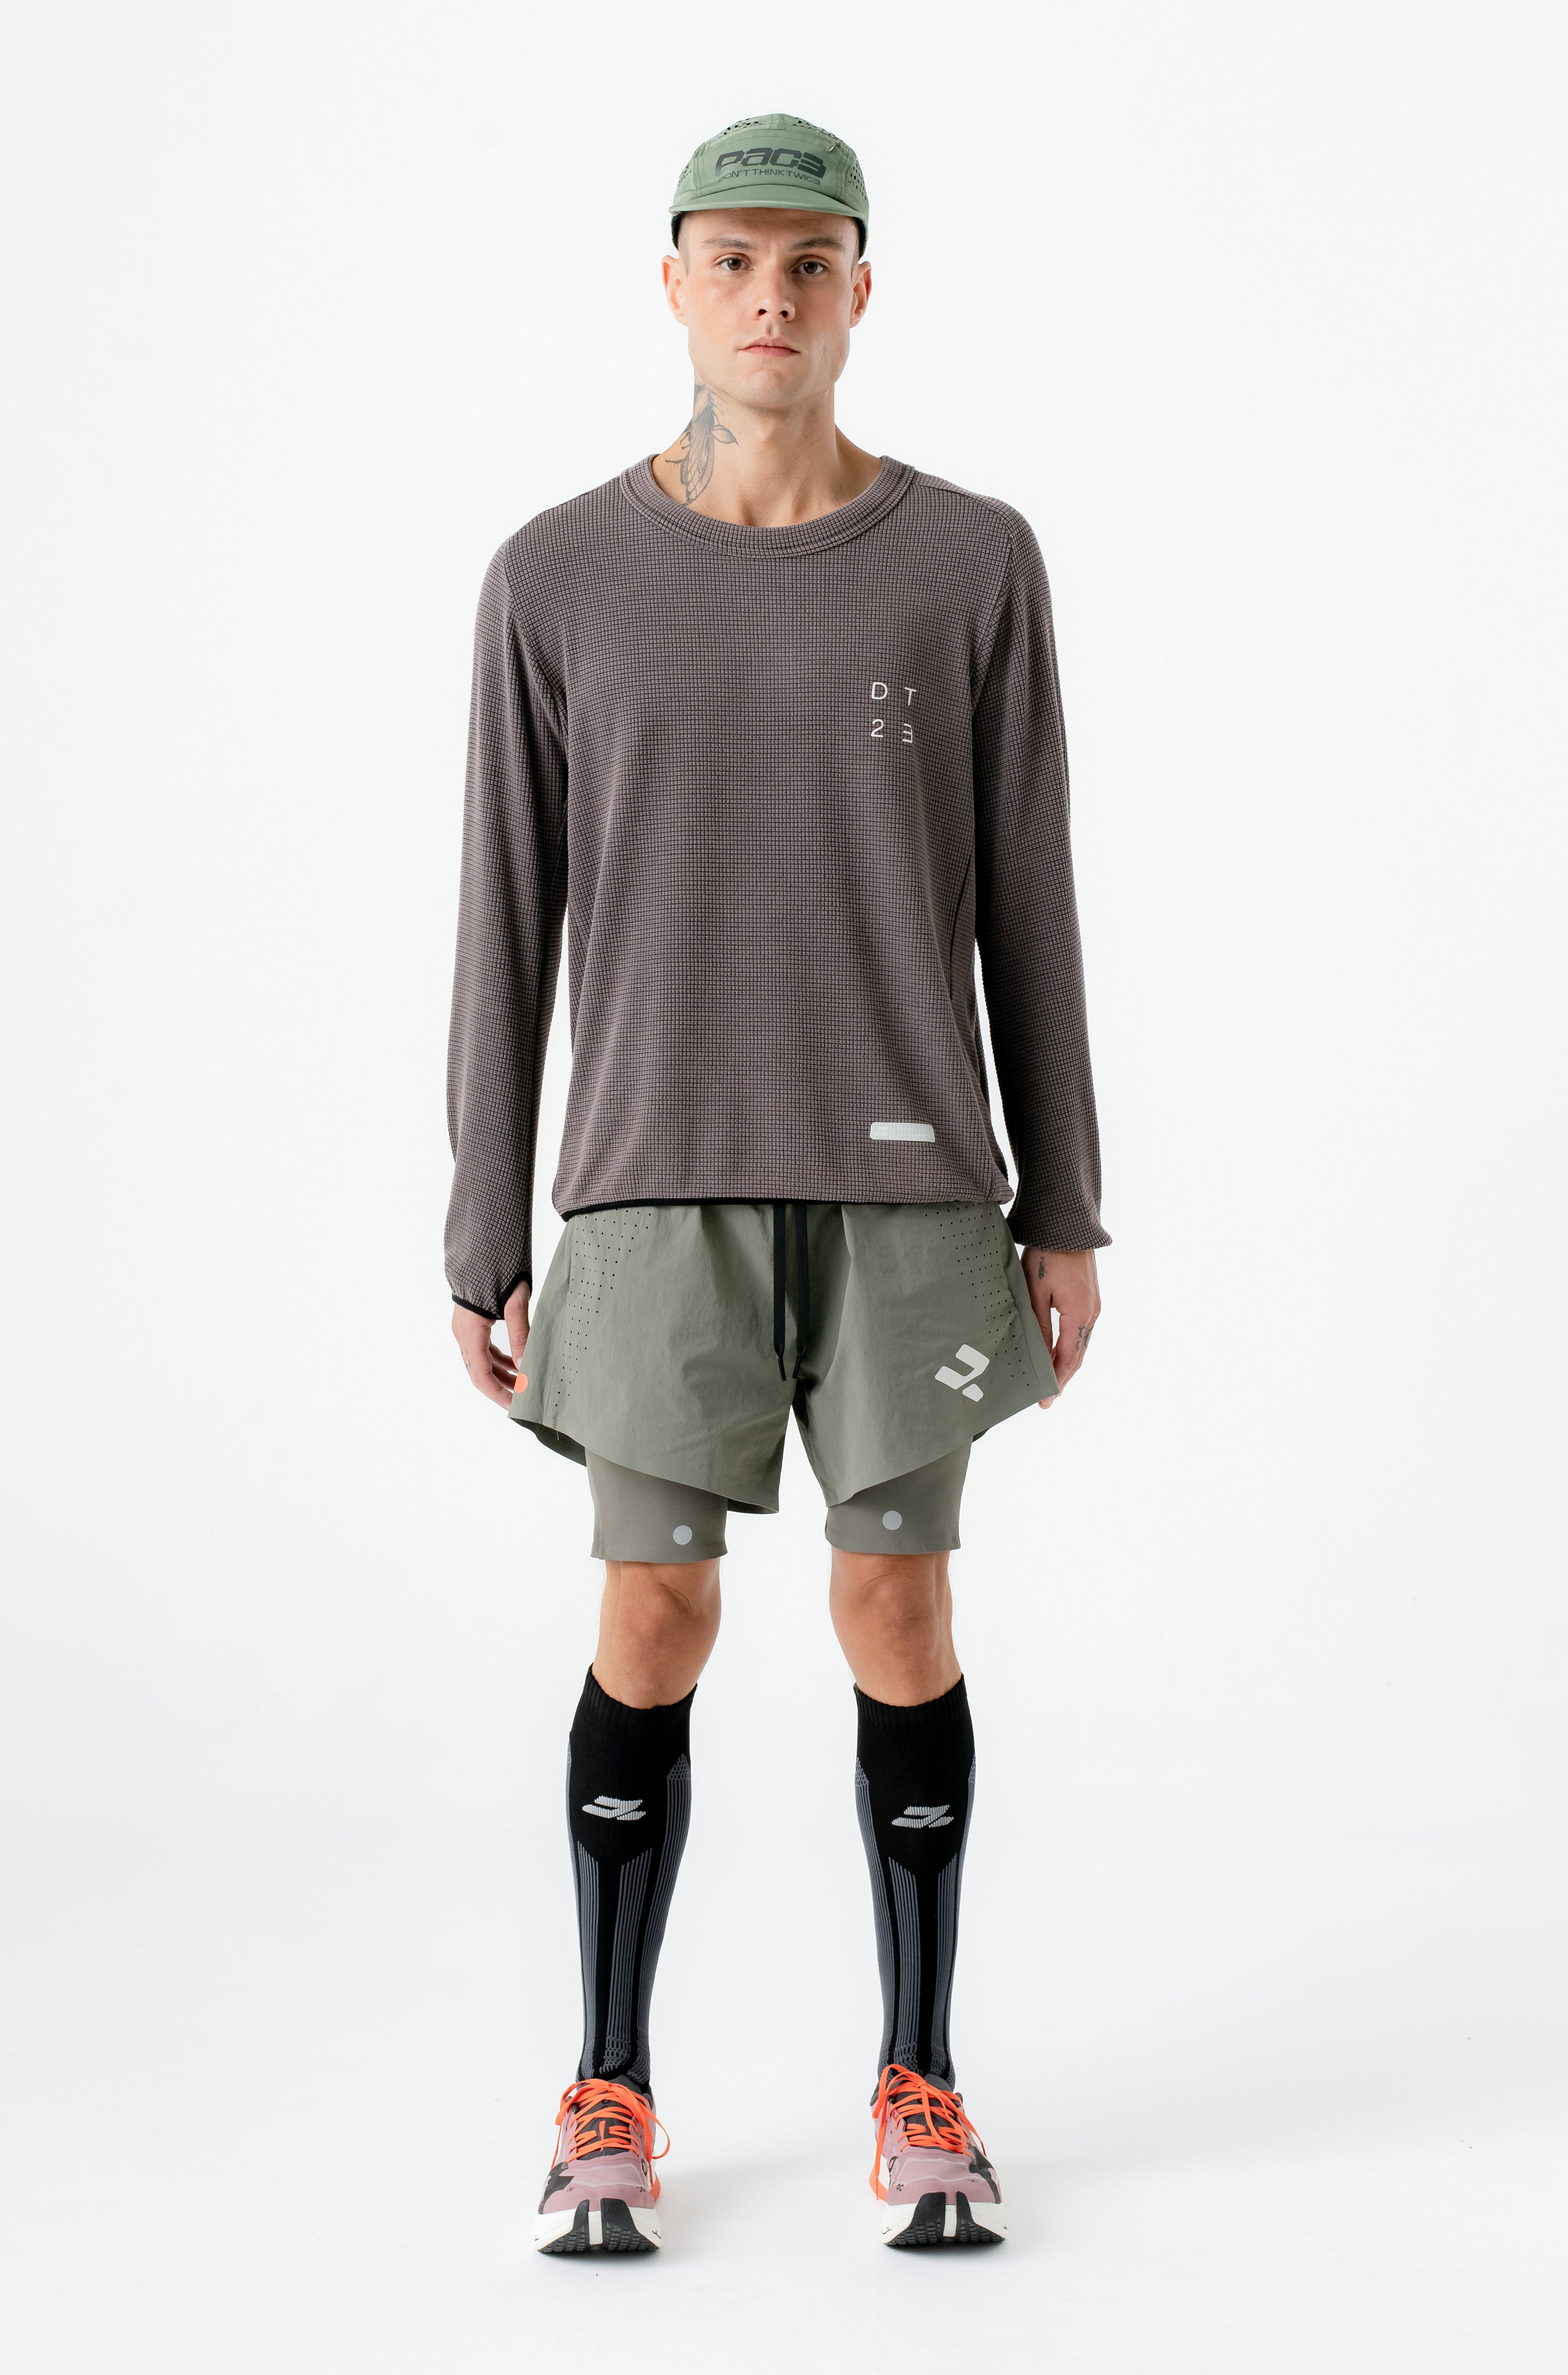 PACE - SHORTS DOUBLE LAYERS GREEN